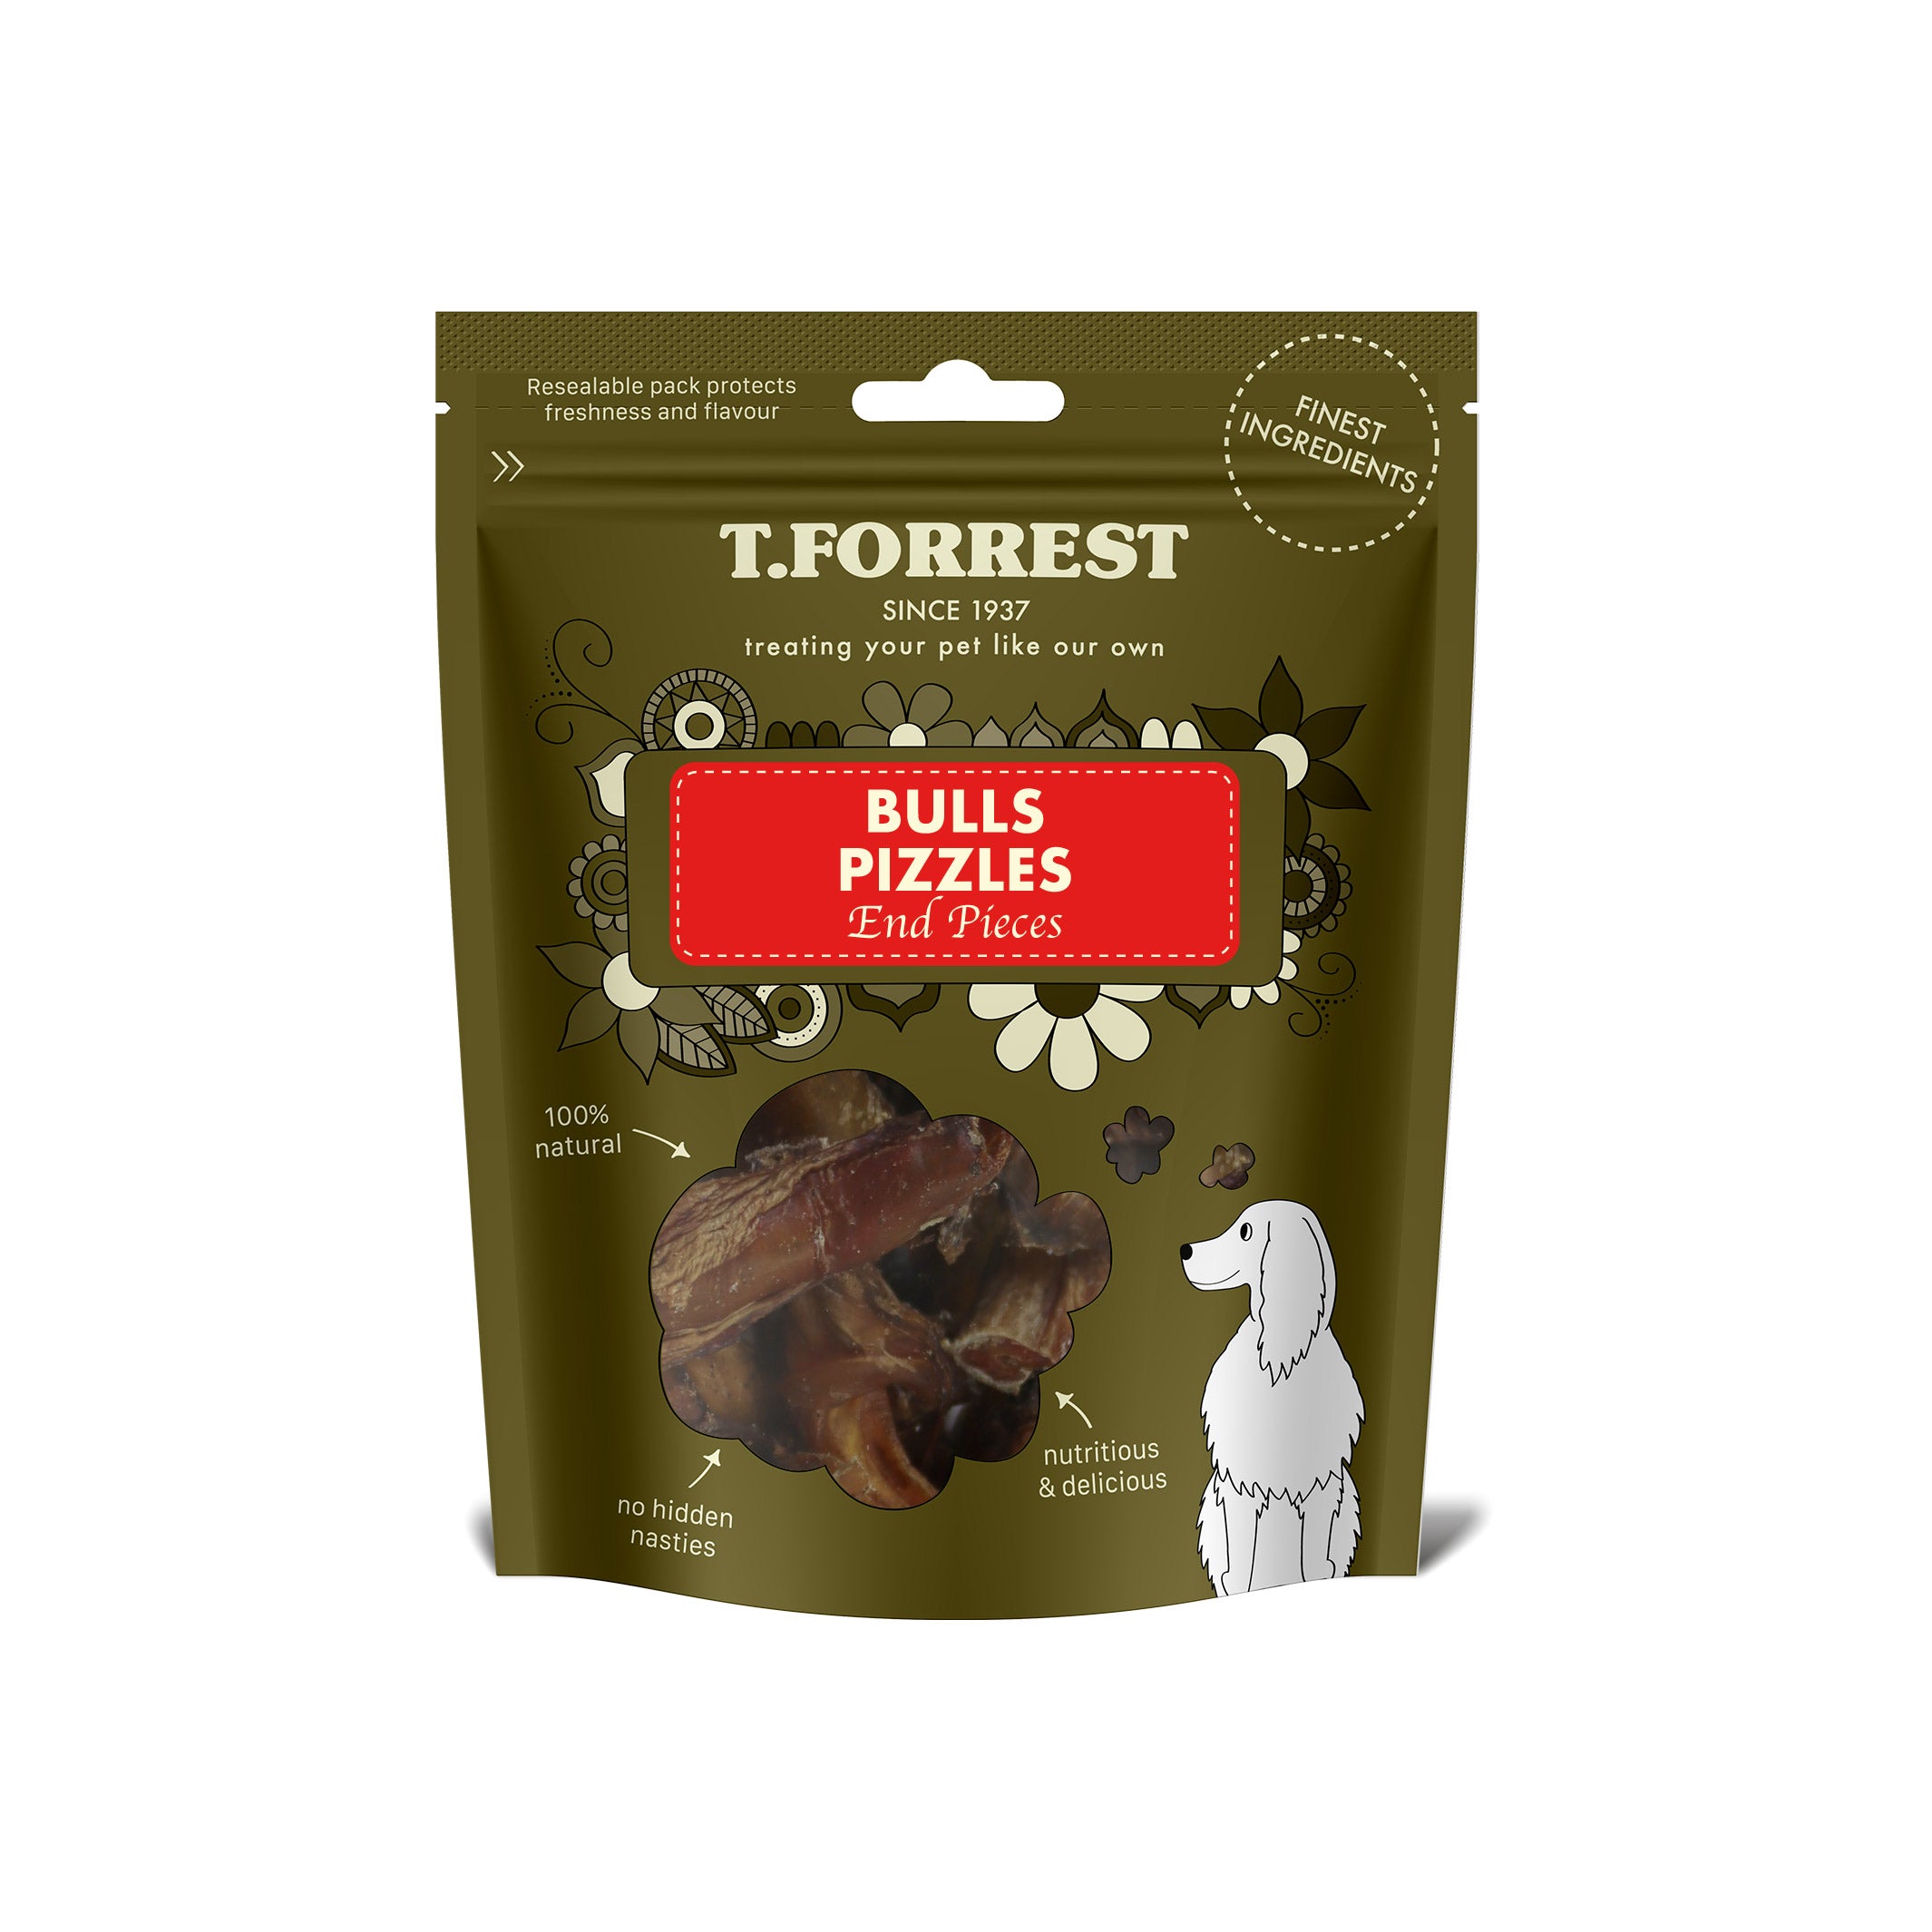 Bulls pizzle end pieces for dogs